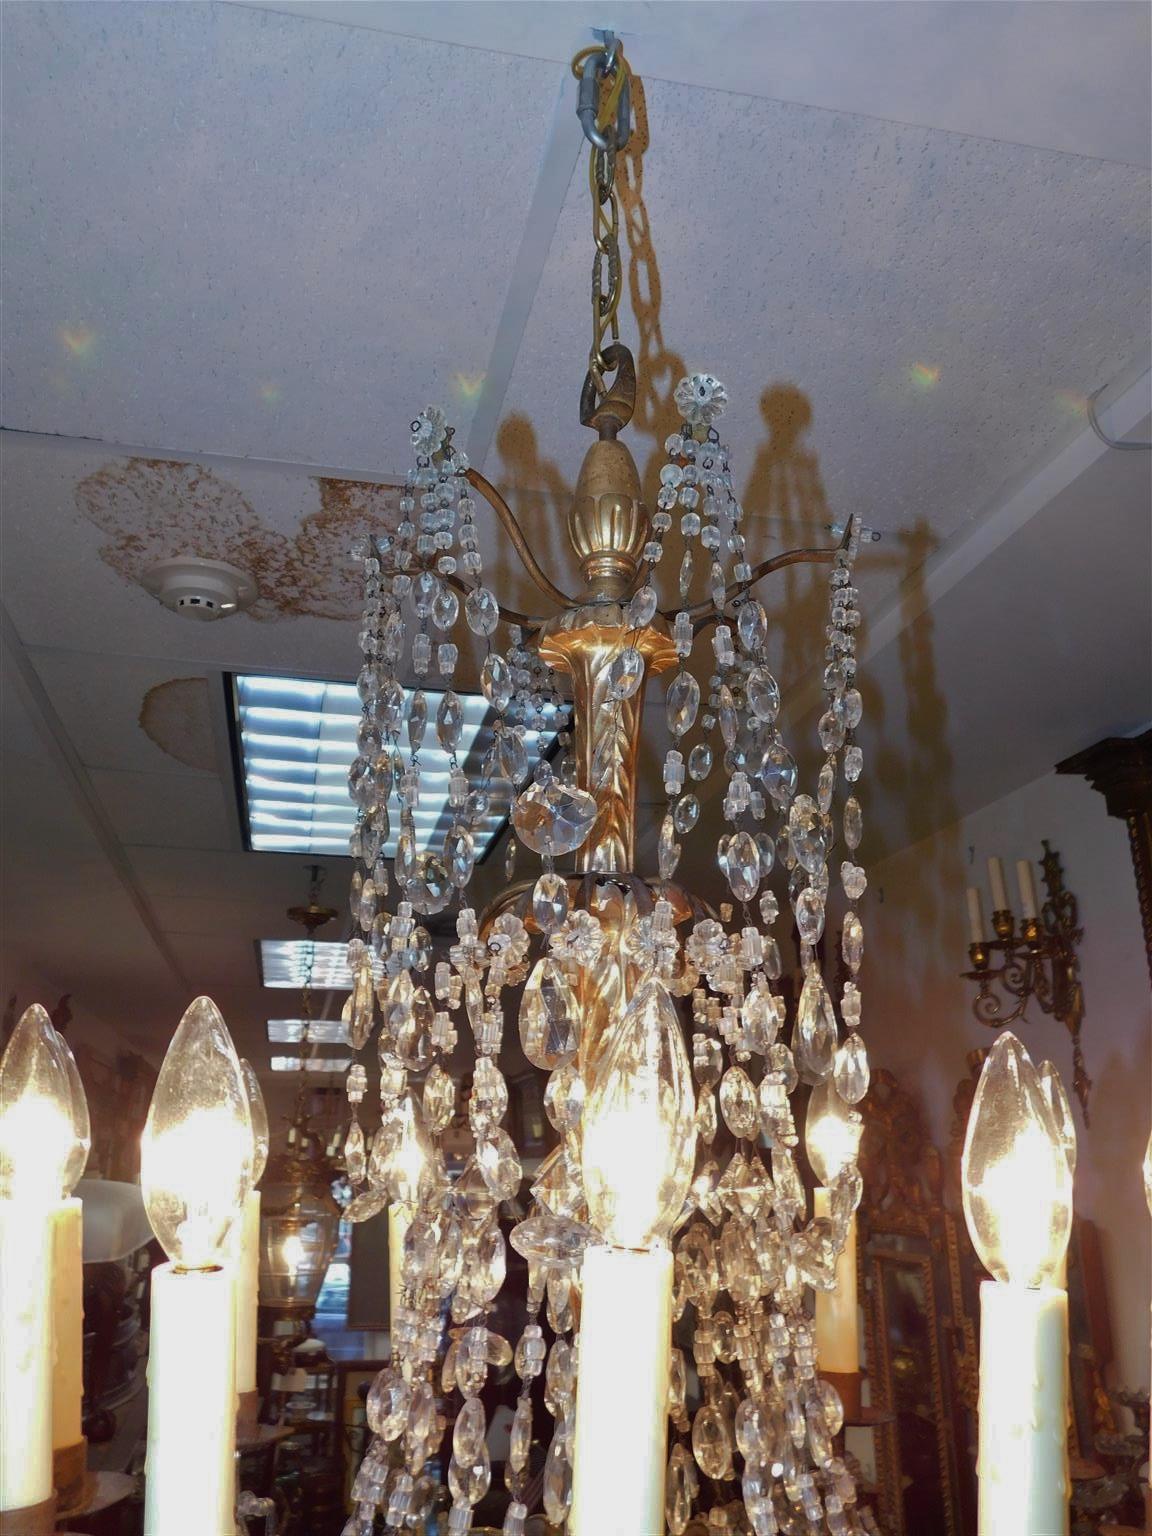 Italian Gilt Carved Wood & Crystal Ten Light Bronze Arm Chandelier, Circa 1790 In Excellent Condition For Sale In Hollywood, SC